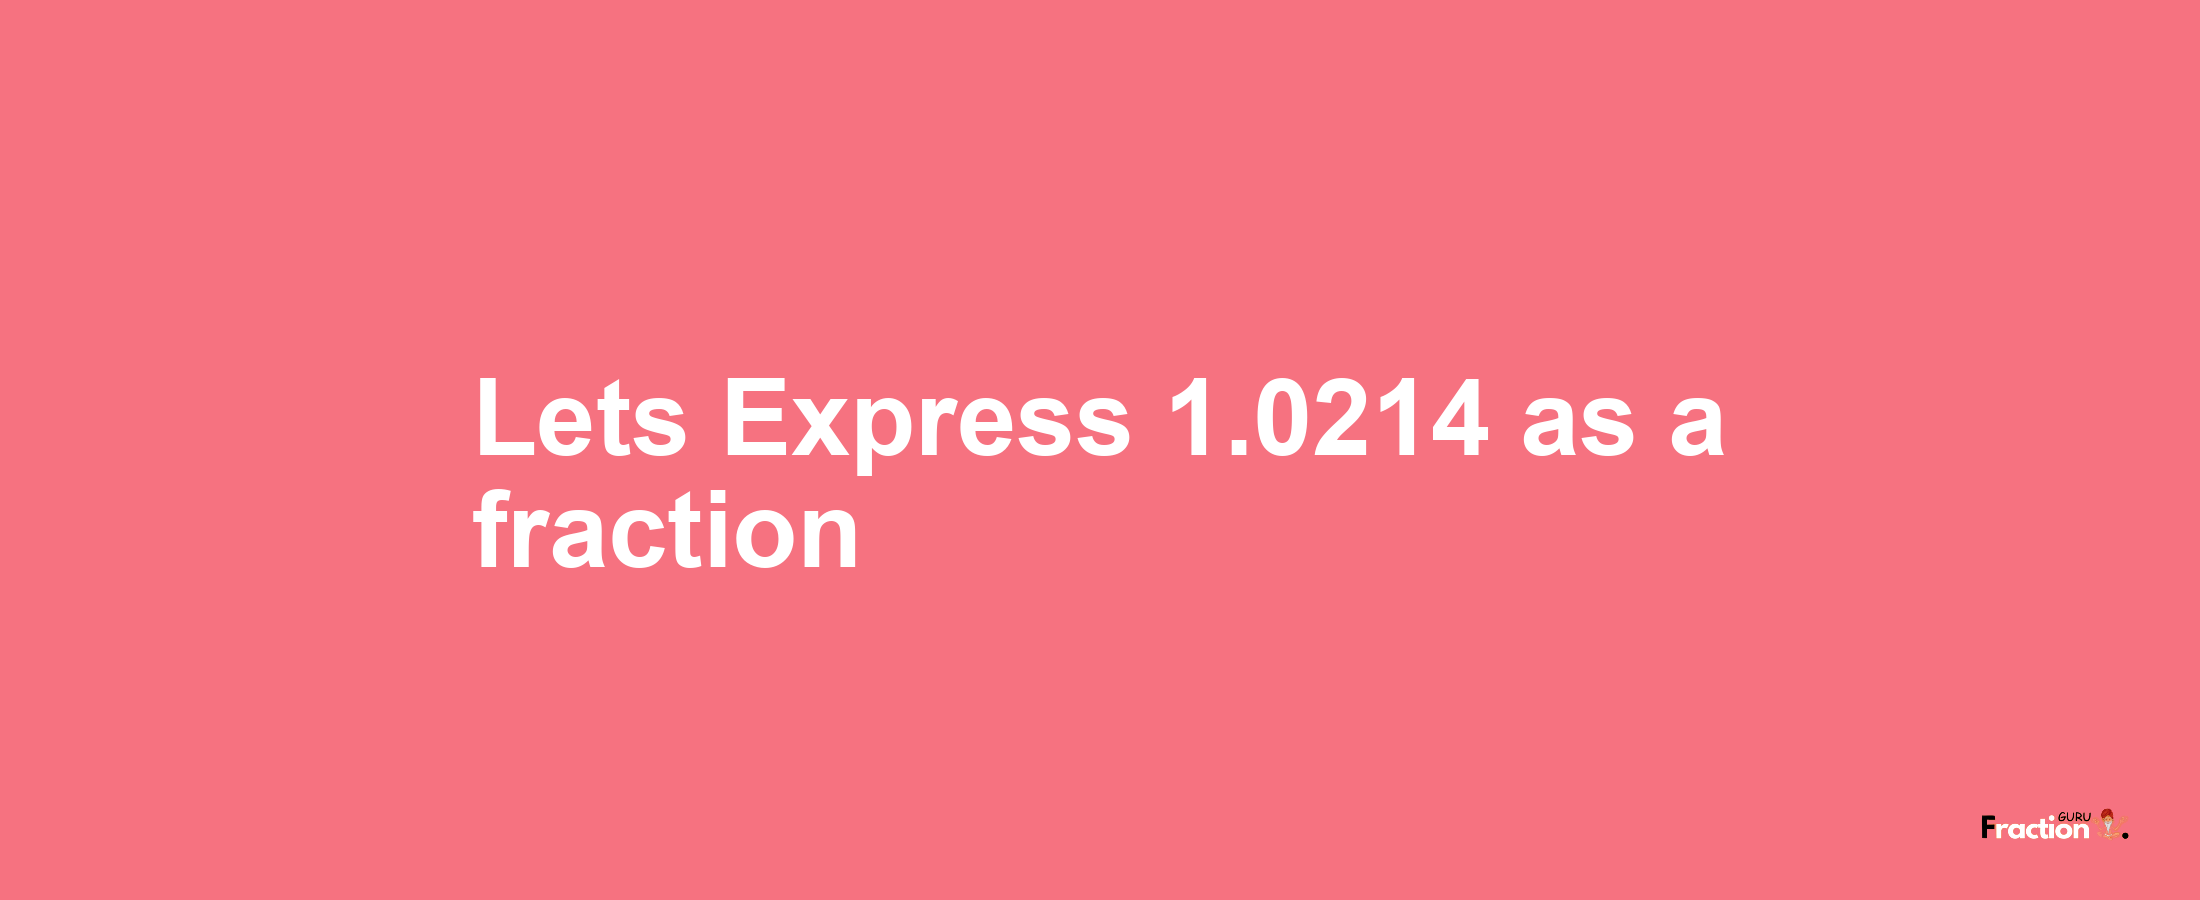 Lets Express 1.0214 as afraction